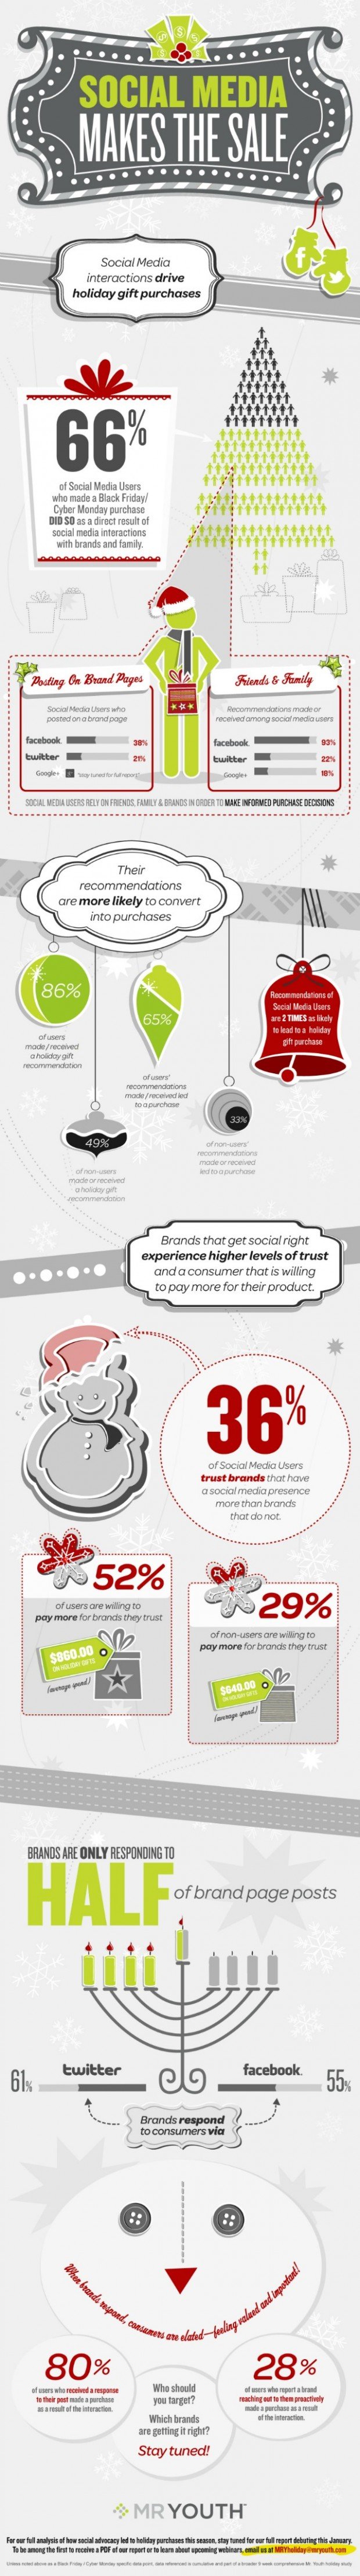 Social Media Holiday Spending [Infographic]